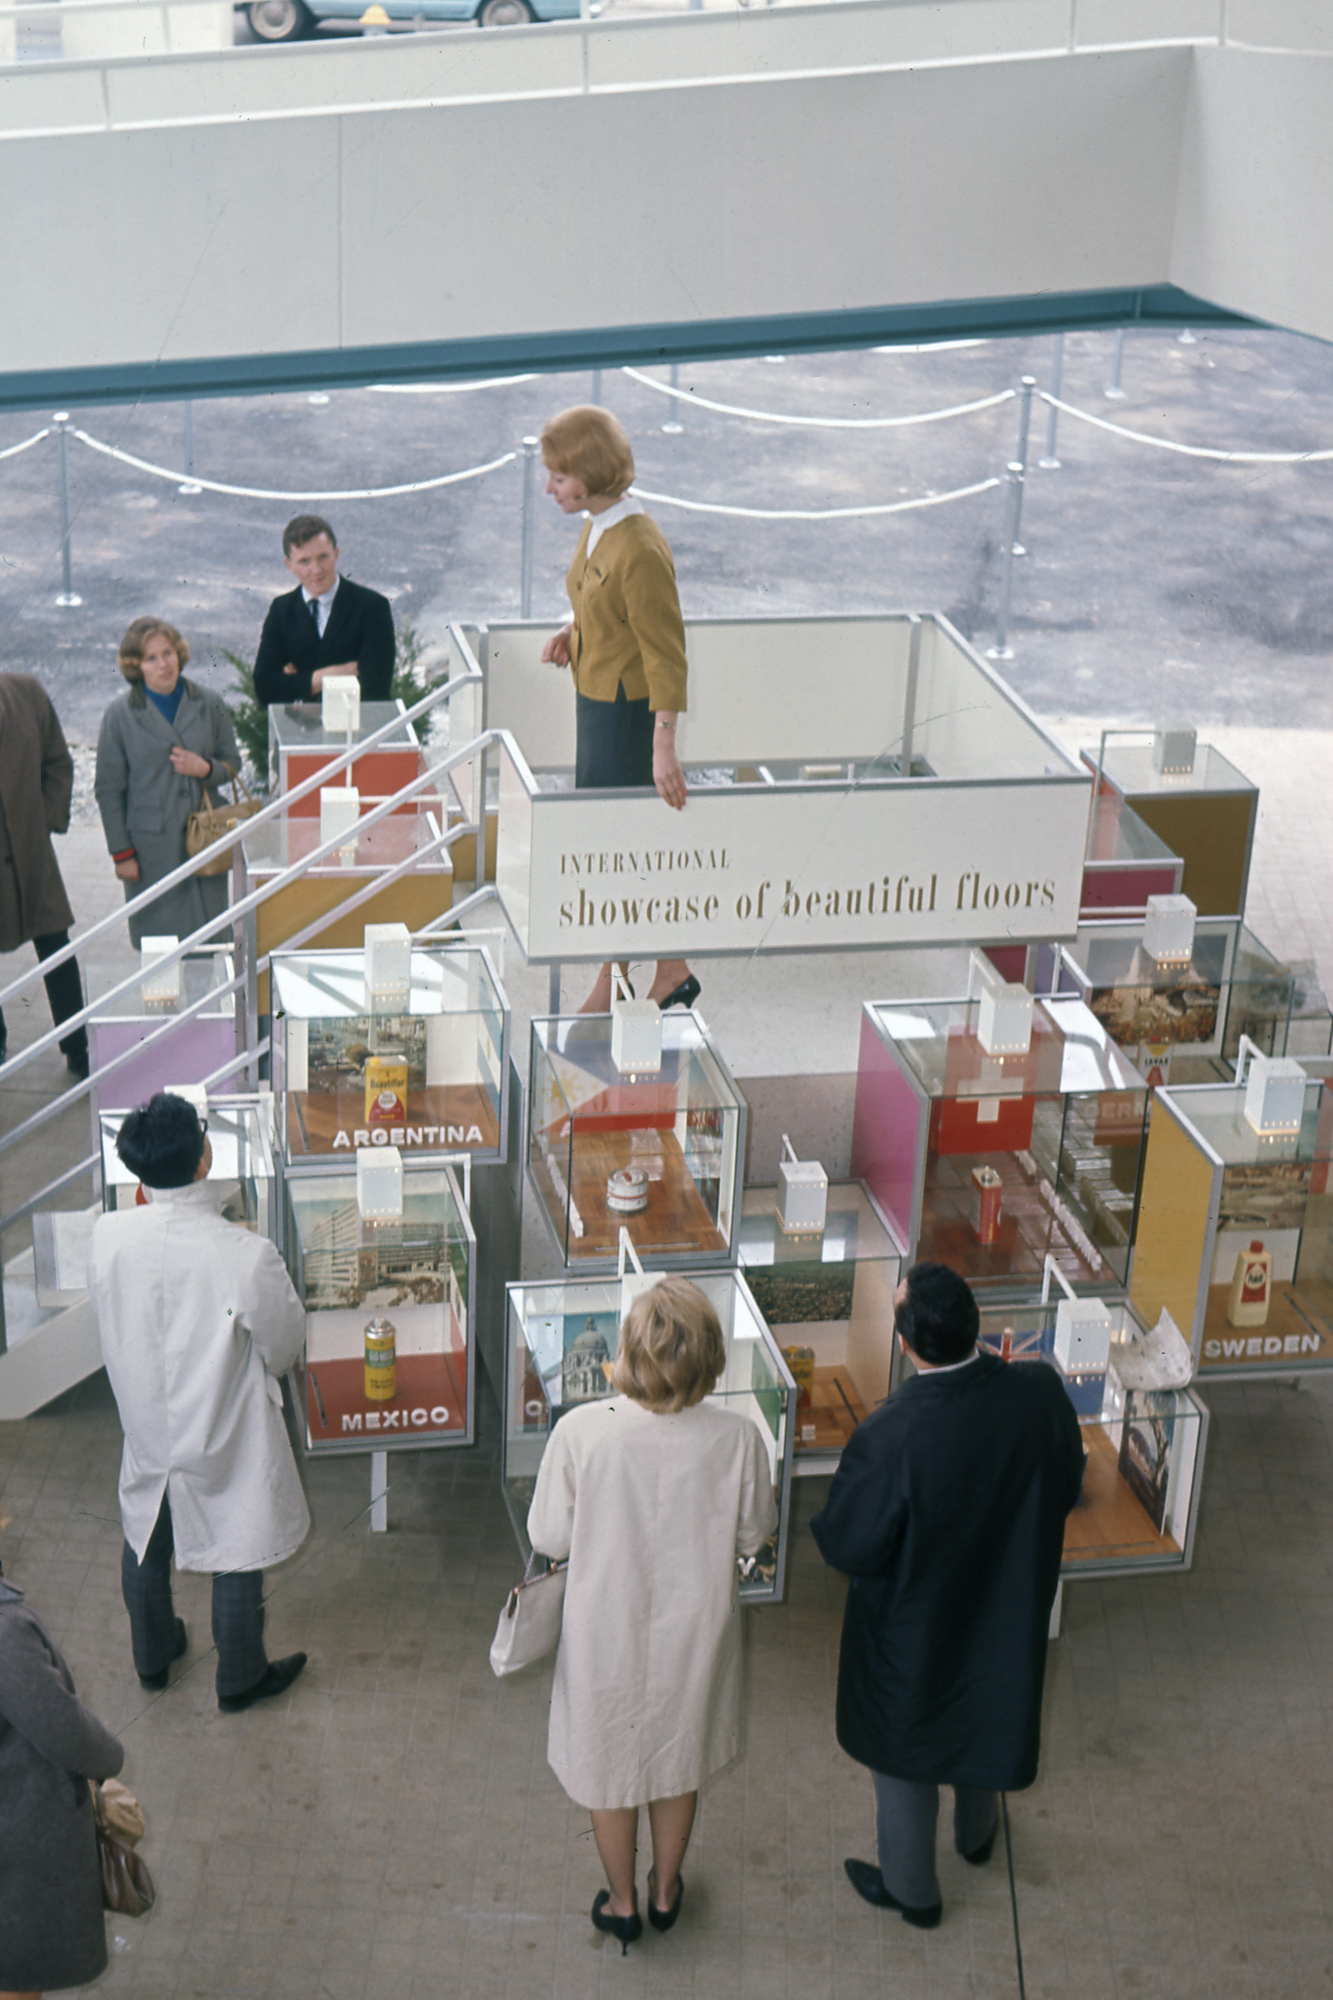 SC Johnson’s 1964 World’s Fair exhibit showing Johnson Wax products from around the globe